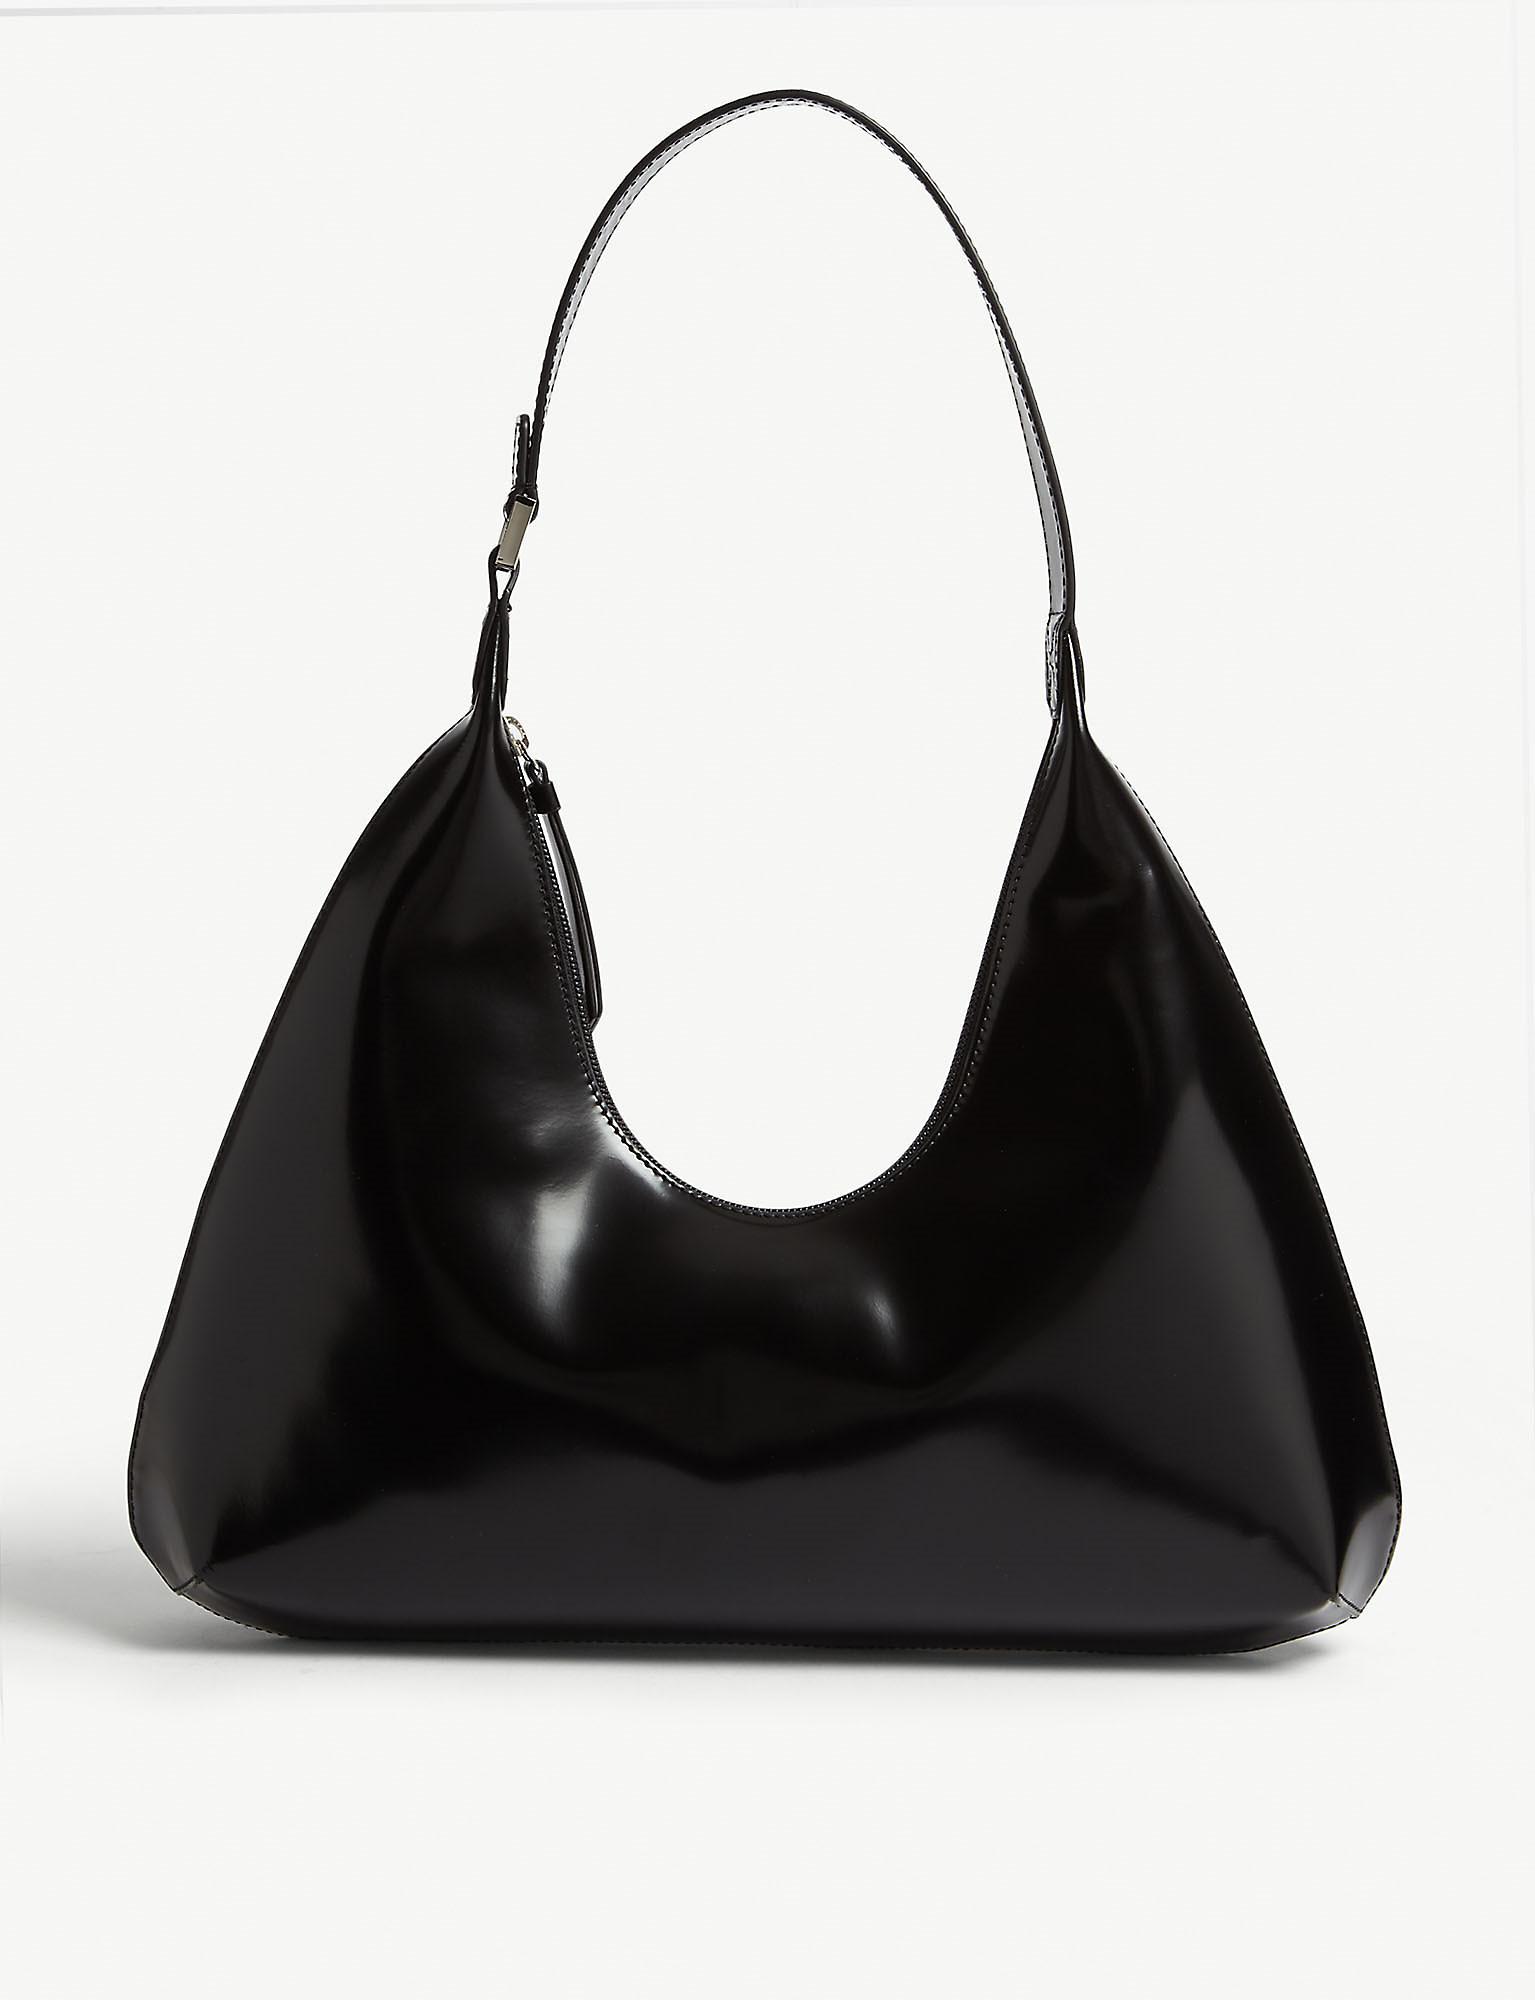 BY FAR Amber Patent Leather Mini Bag in Black - Lyst